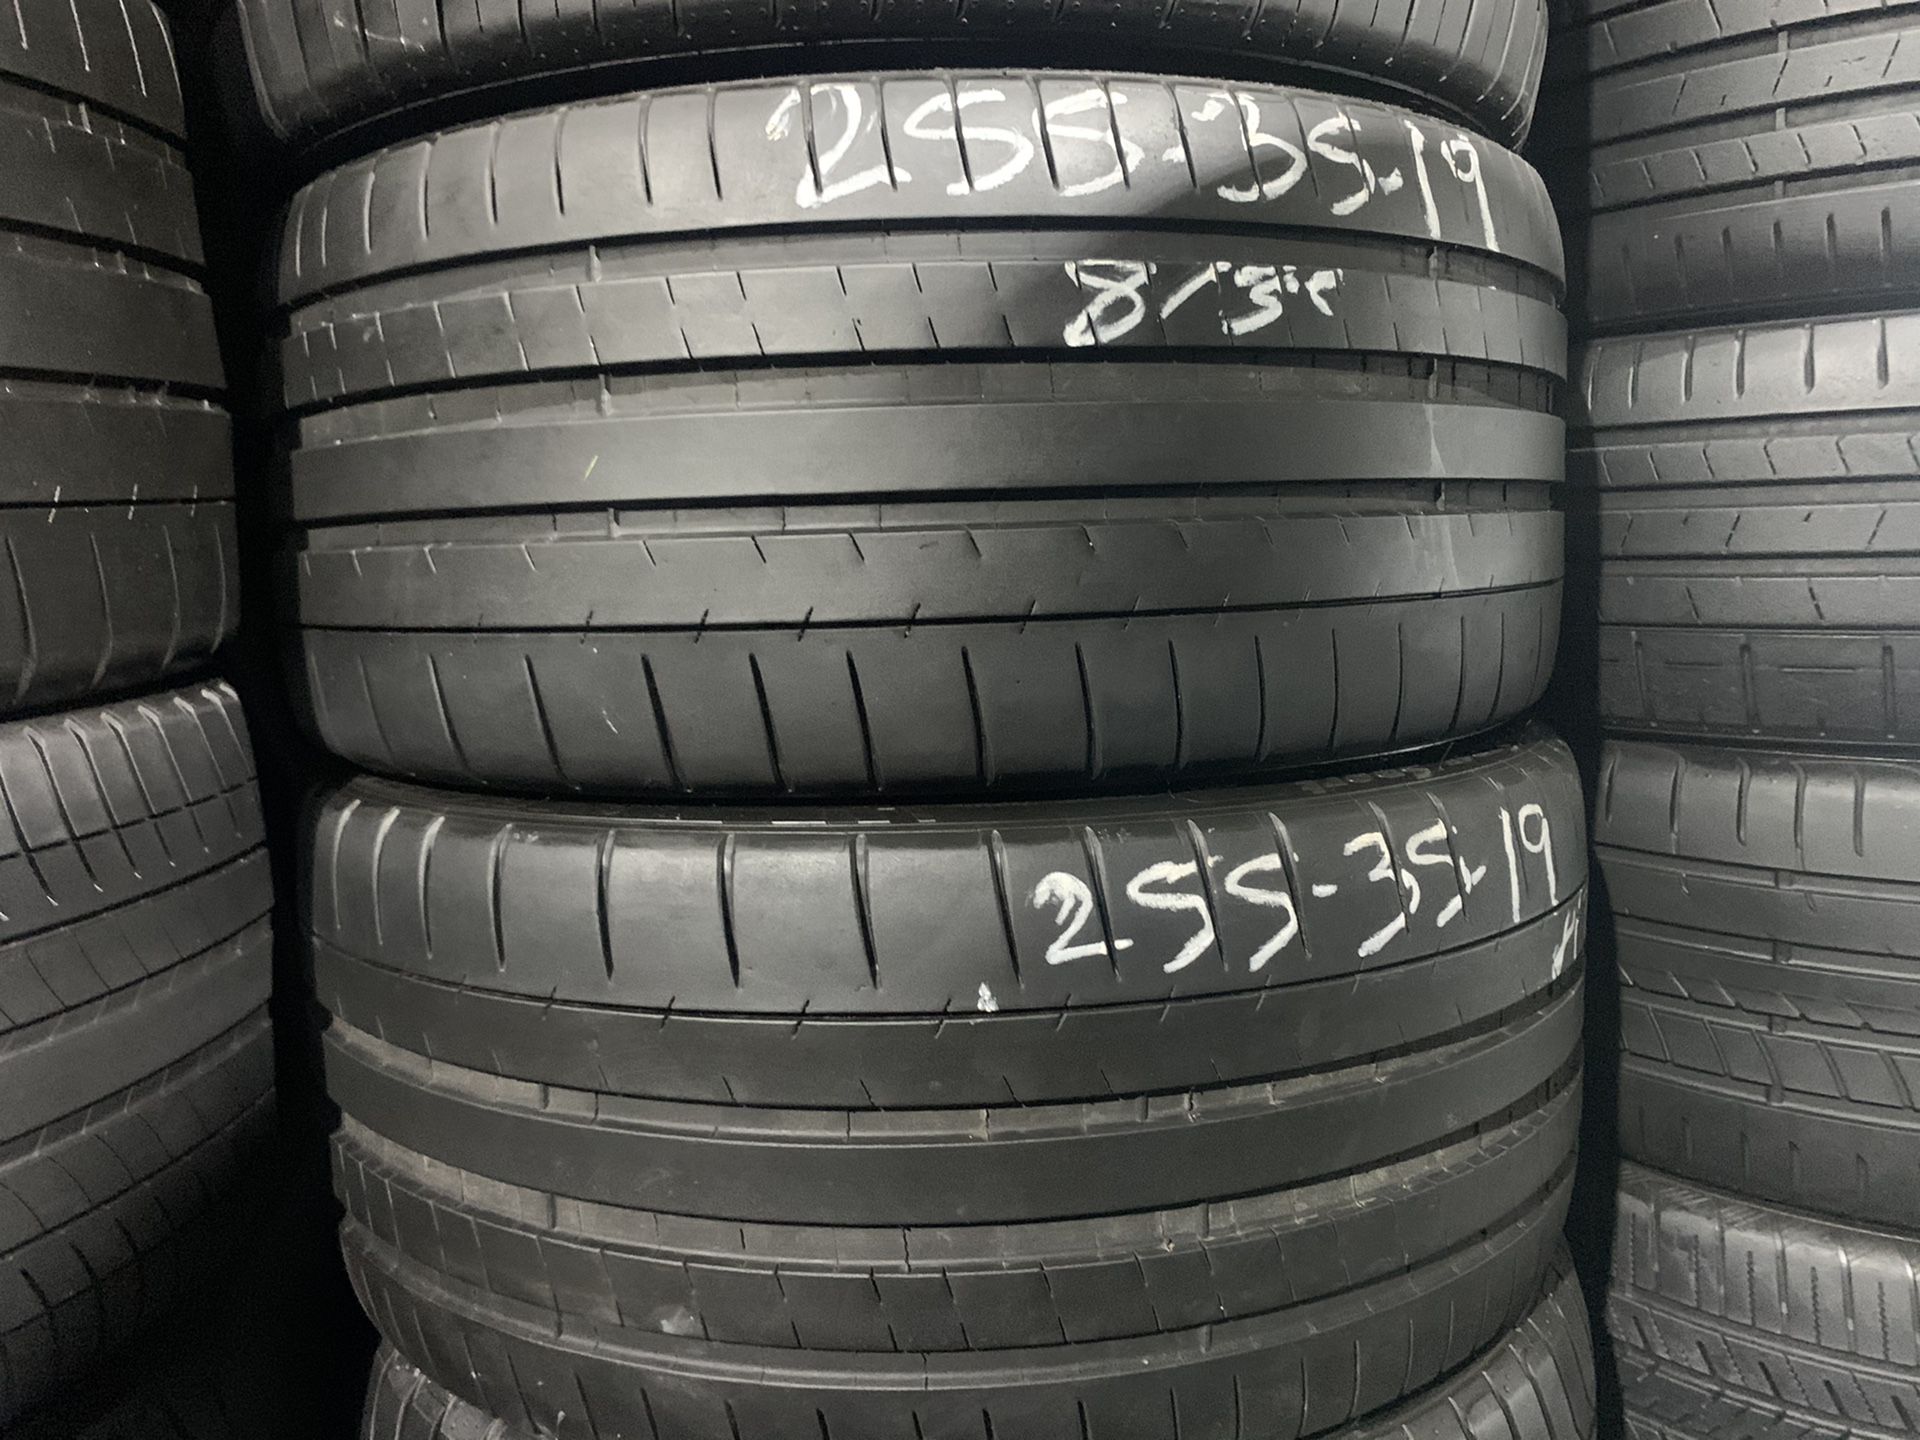 19” 255/35/19 Michelin Pilot Super Sport Runflats no patch with 80% left for both tires